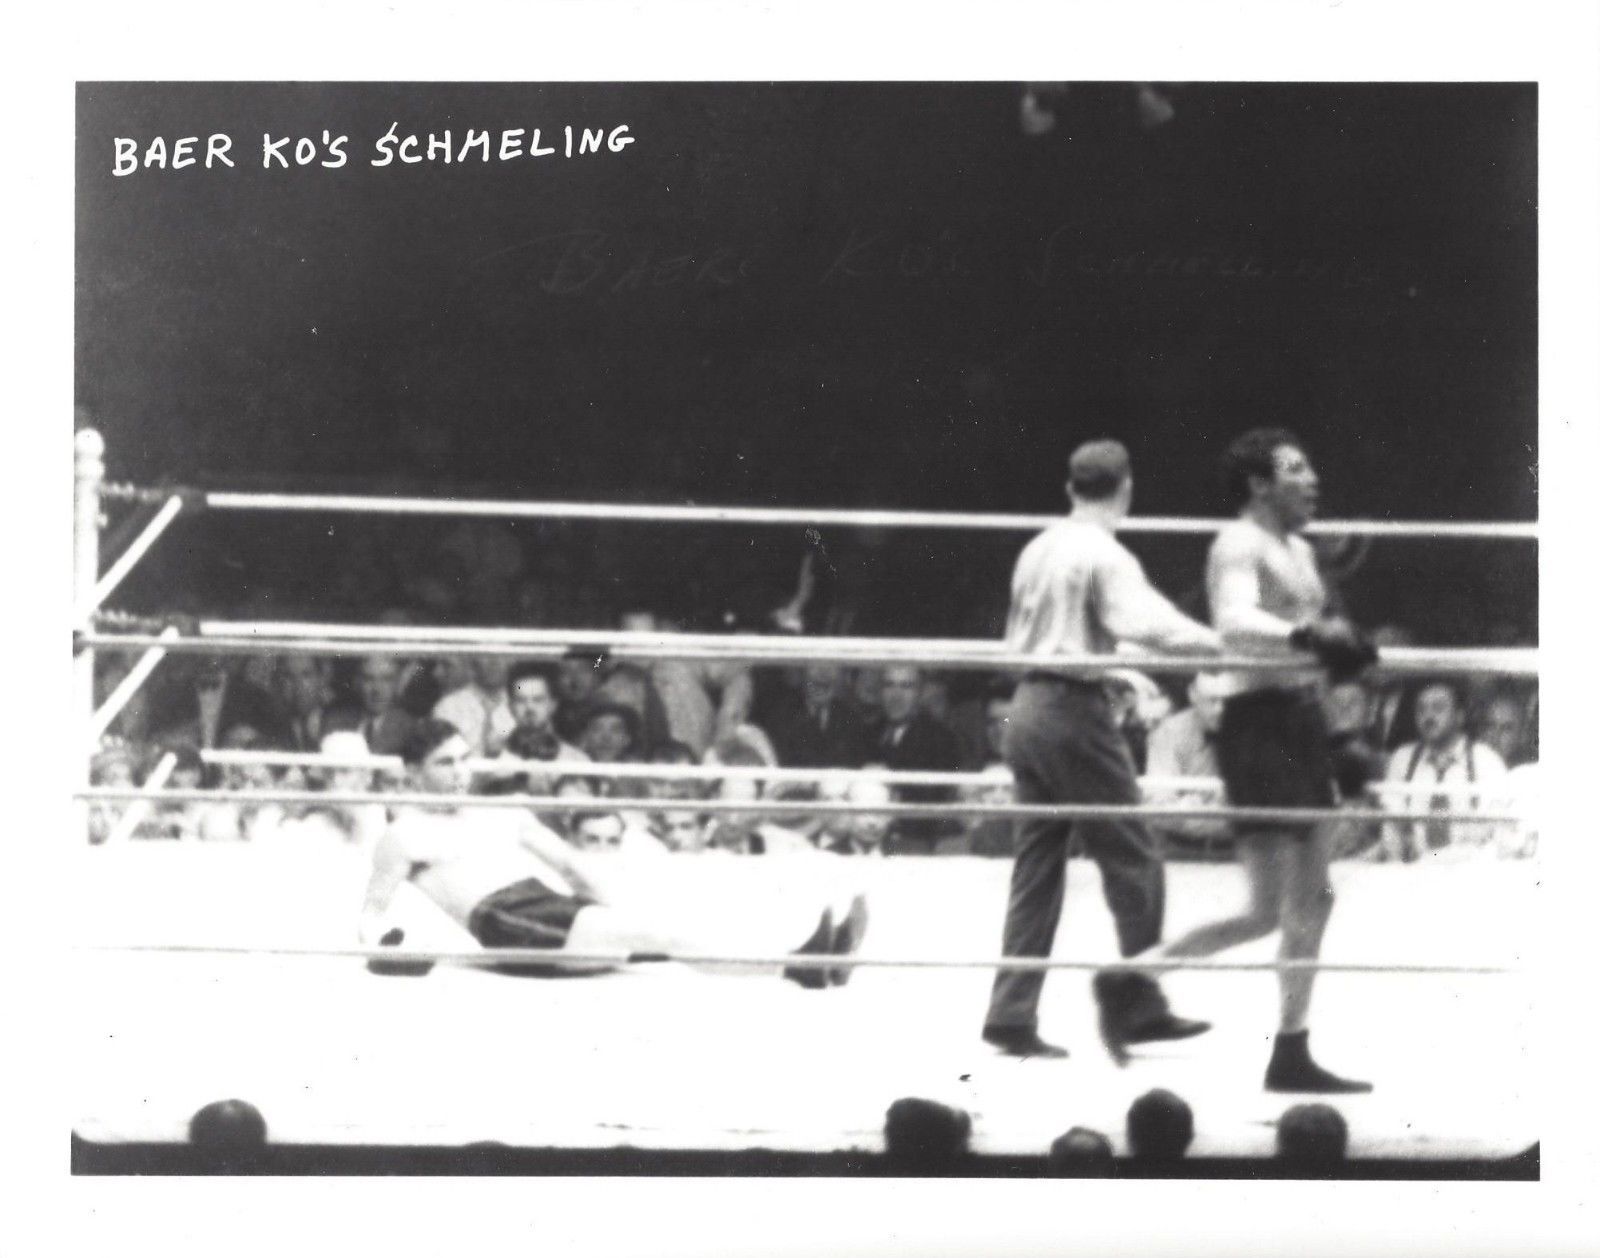 Item image 1. MAX BAER KO's MAX SCHMELING 8X10 PHOTO BOXING PICTURE. 